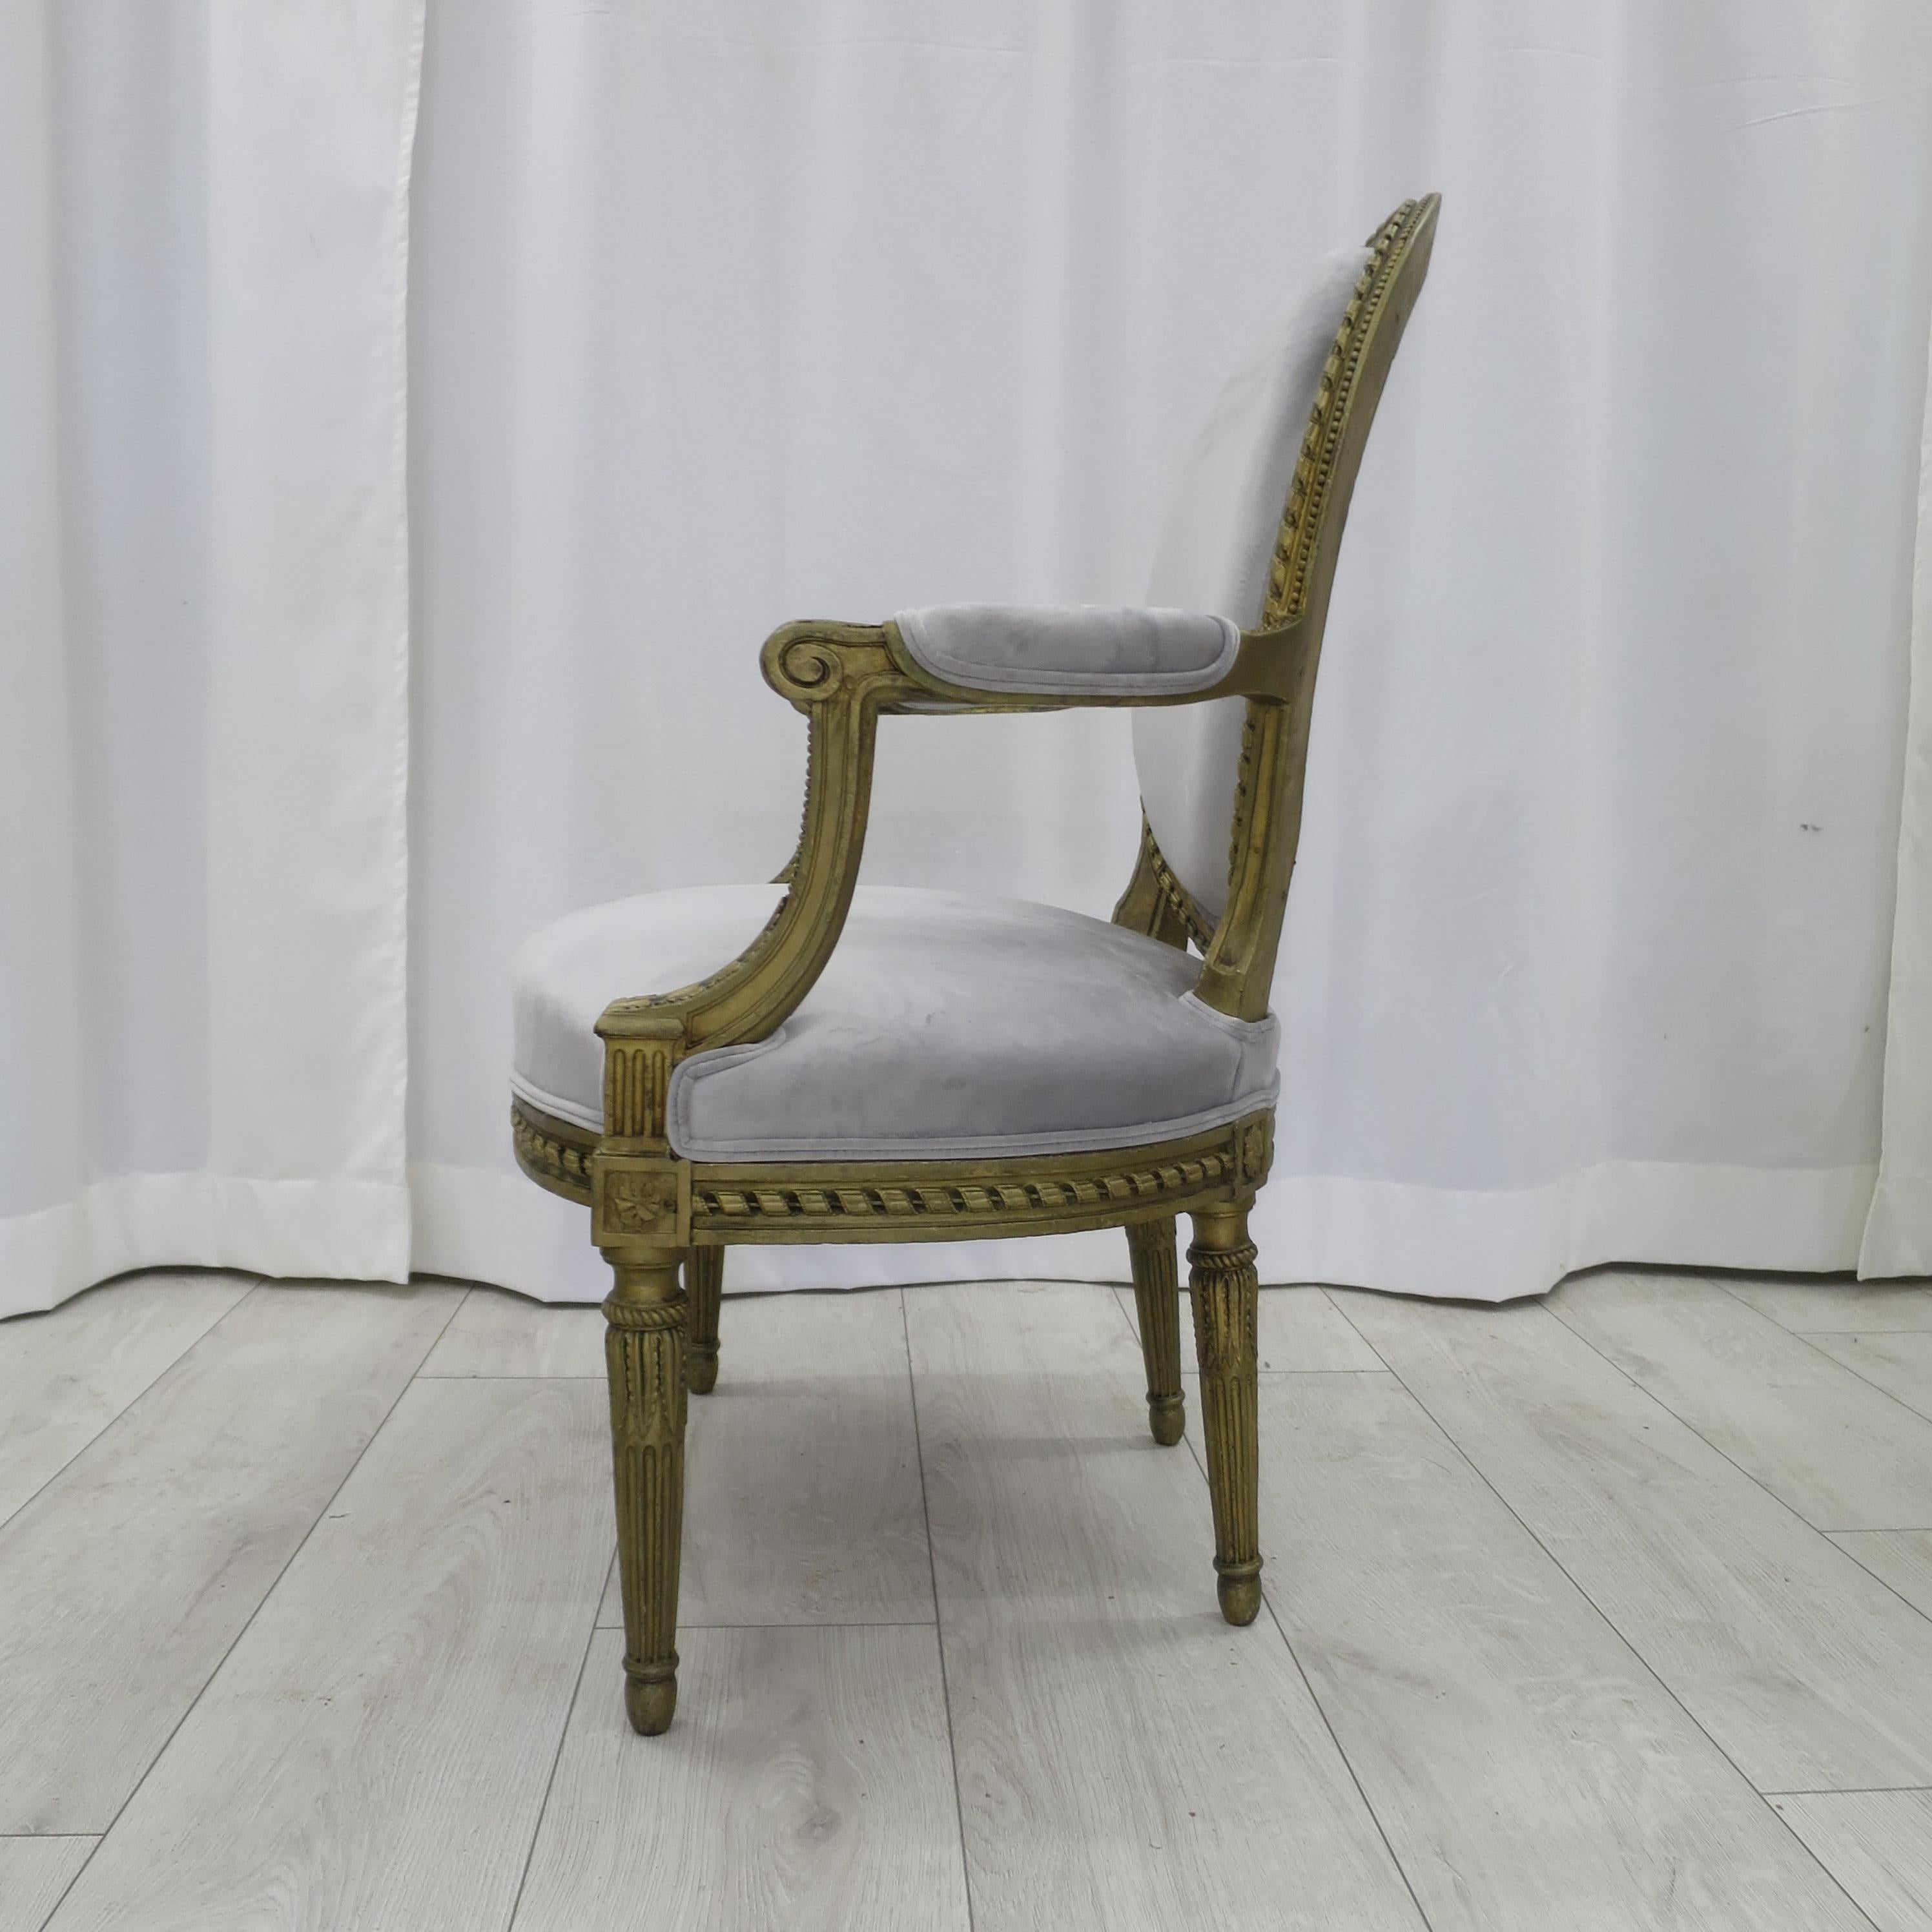 European Pair of Cabriolet Armchairs in Giltwood 19th Century Style Louis XVI For Sale